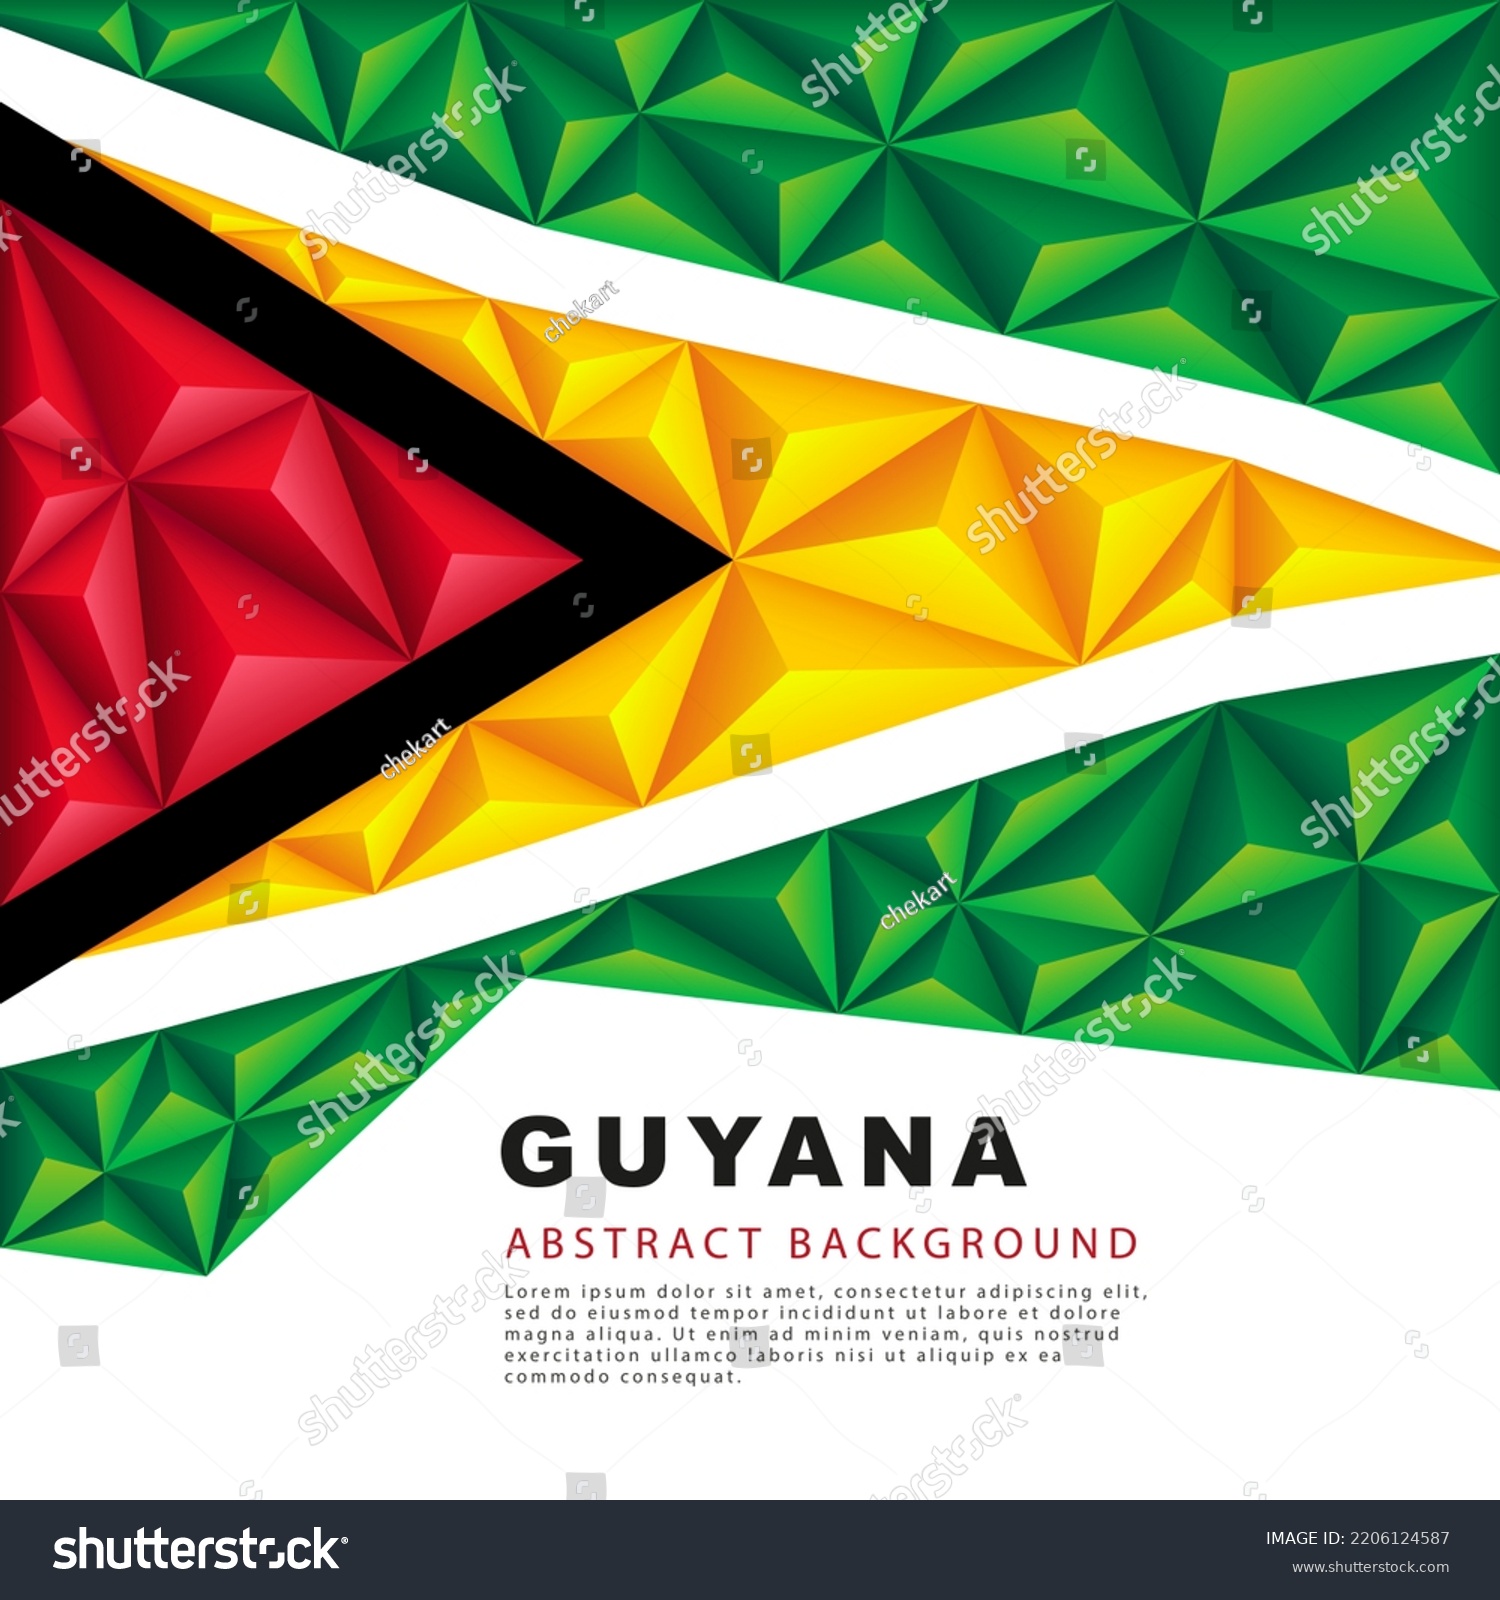 SVG of Guyana polygonal flag. Vector illustration. Abstract background in the form of colorful green, black, red, white and yellow stripes of the Guyanese flag. svg